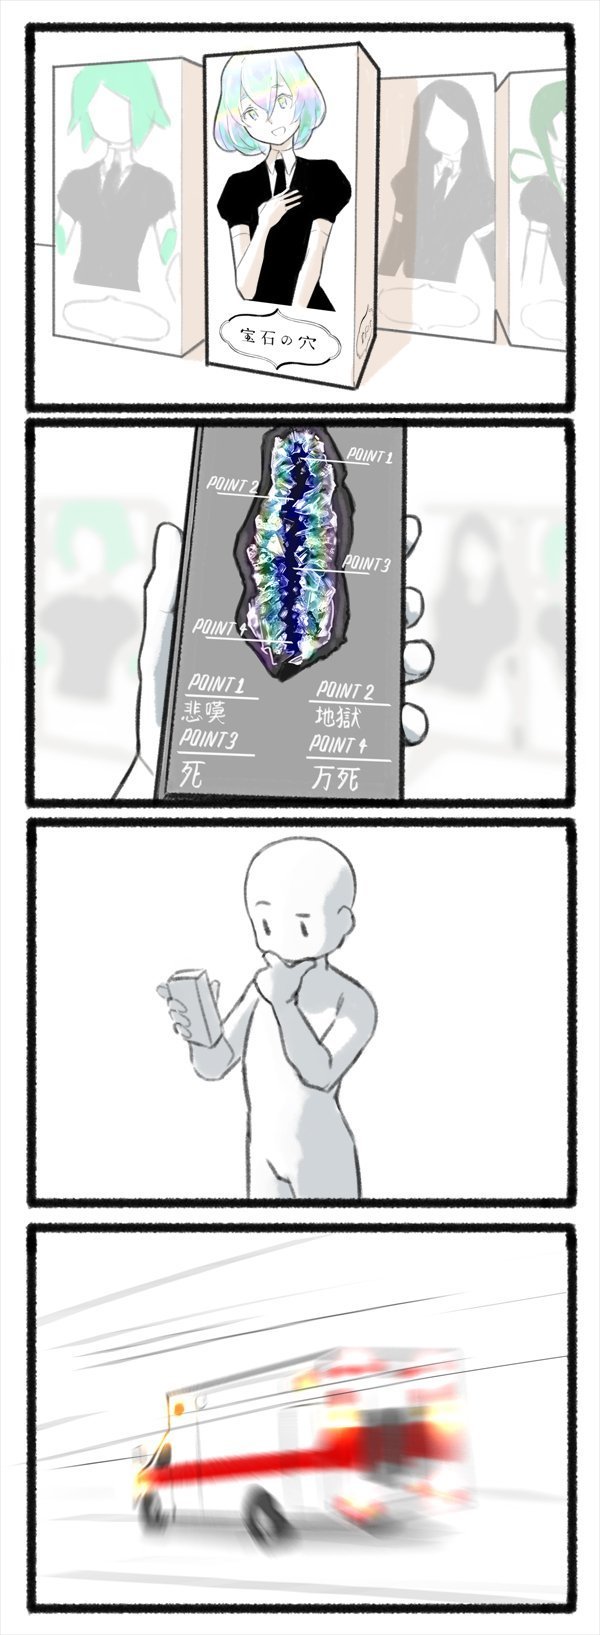 crystals are sharp. - meme